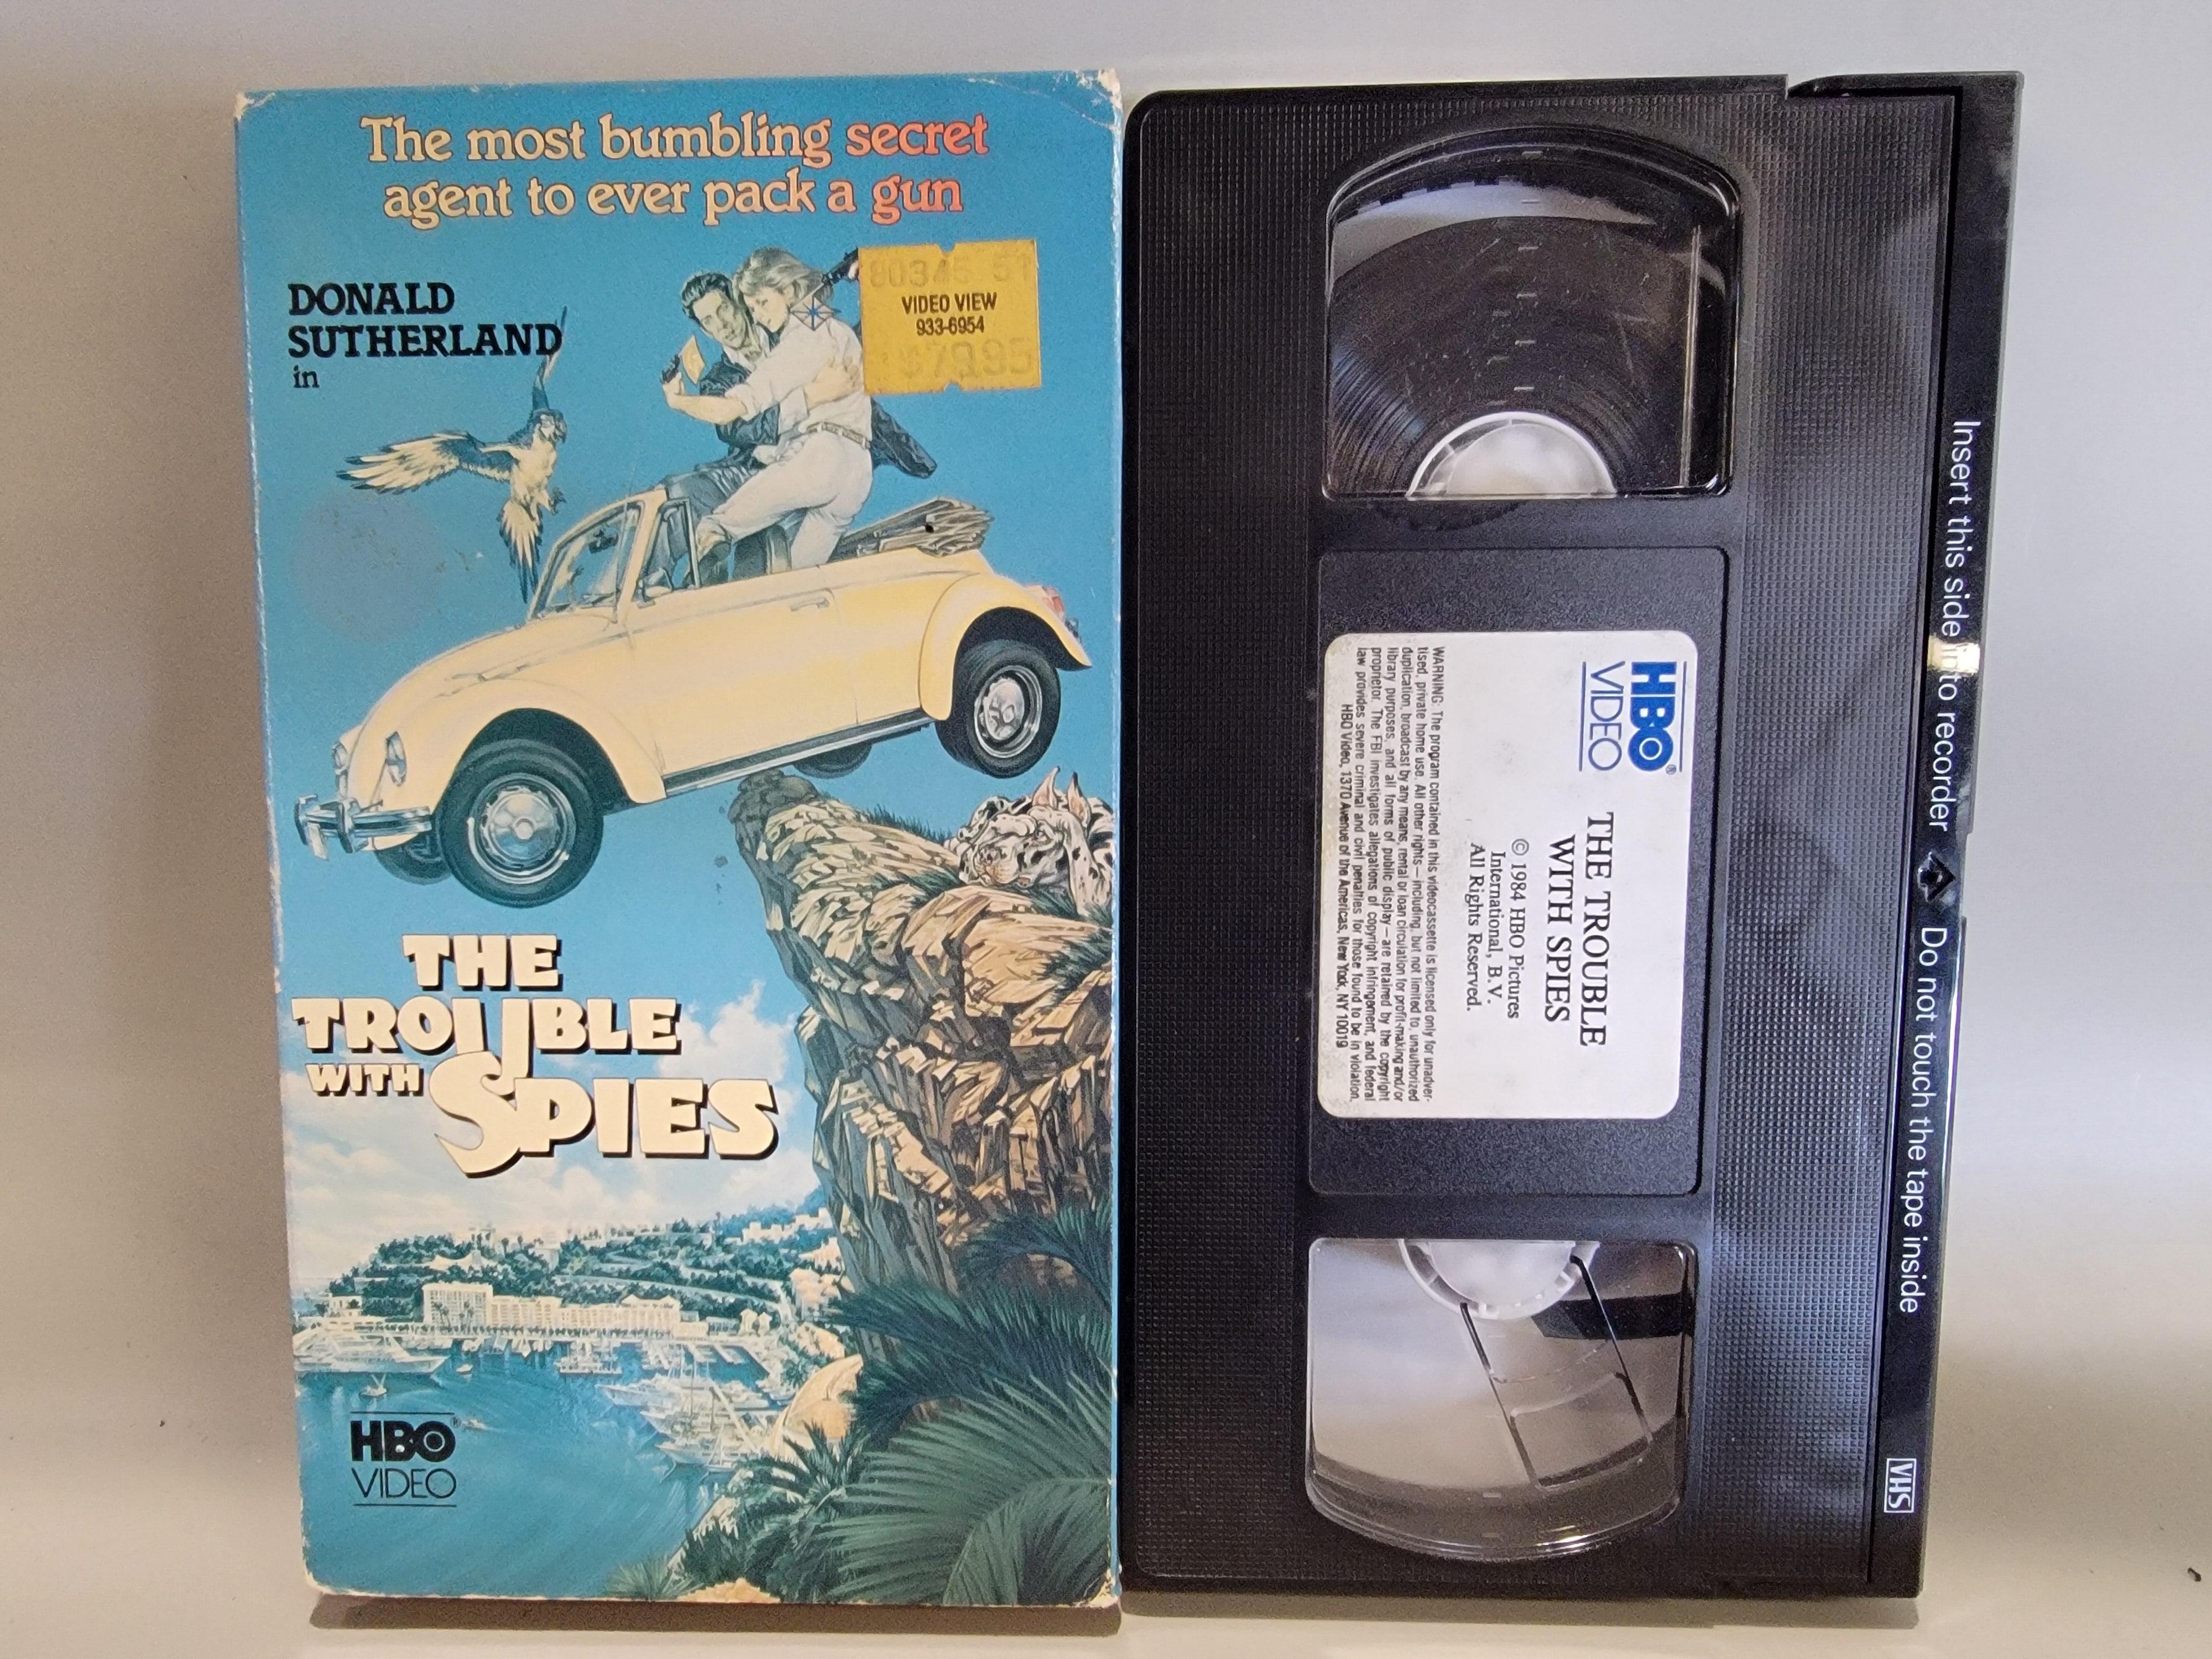 THE TROUBLE WITH SPIES VHS [USED]